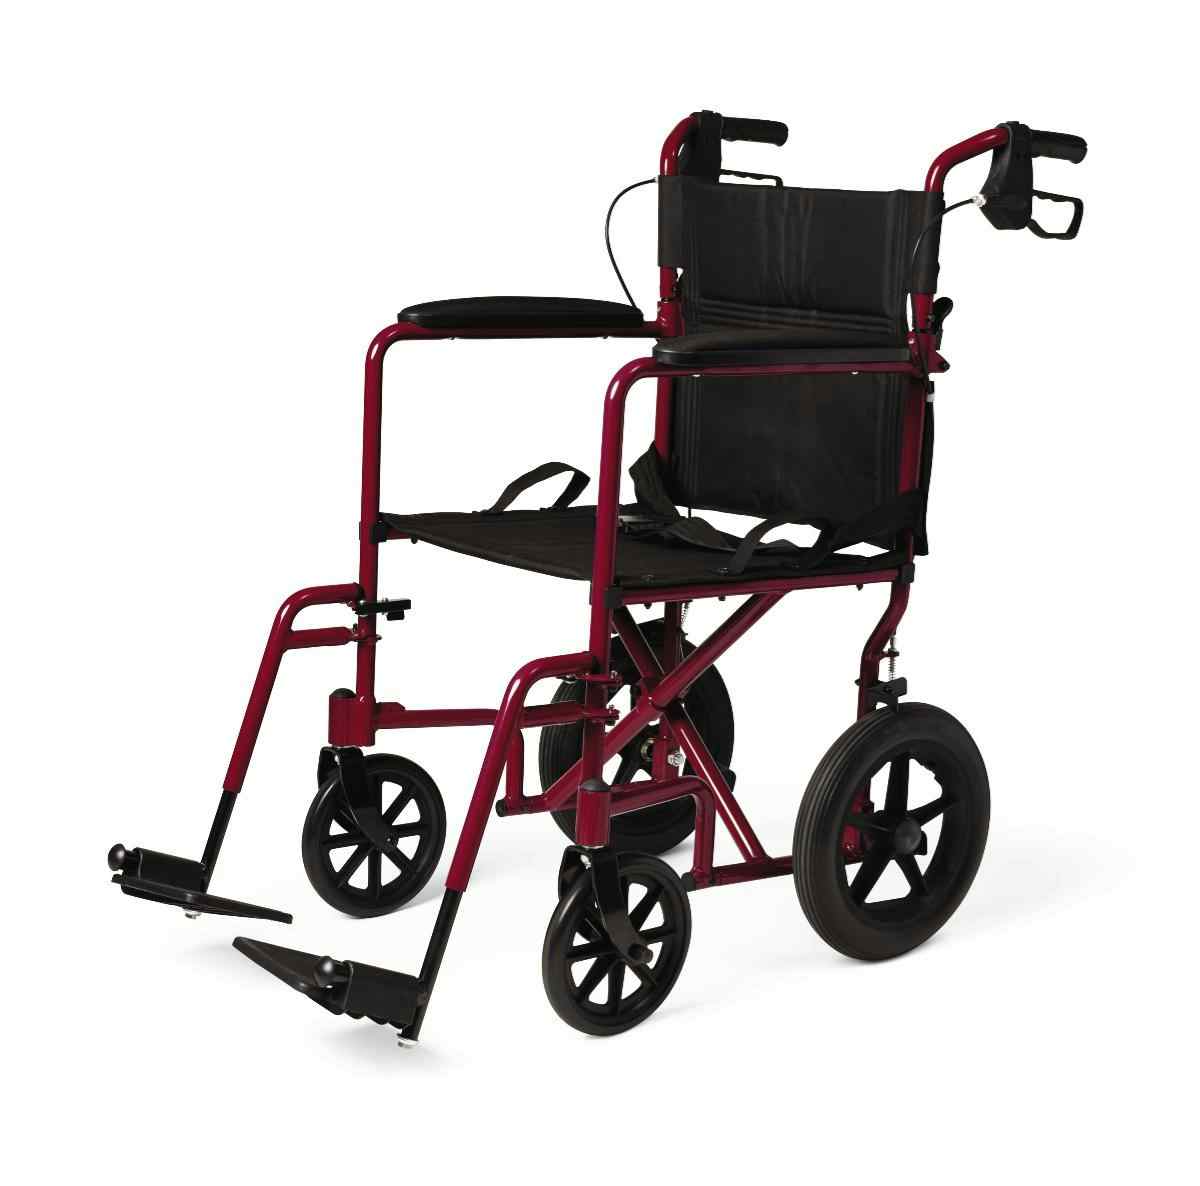 Medline Basic Aluminum Transport Chair, Permanent Full-Length Arms, Swing-Away Footrests, 12", MDS808210ARE, Red - 1 Each